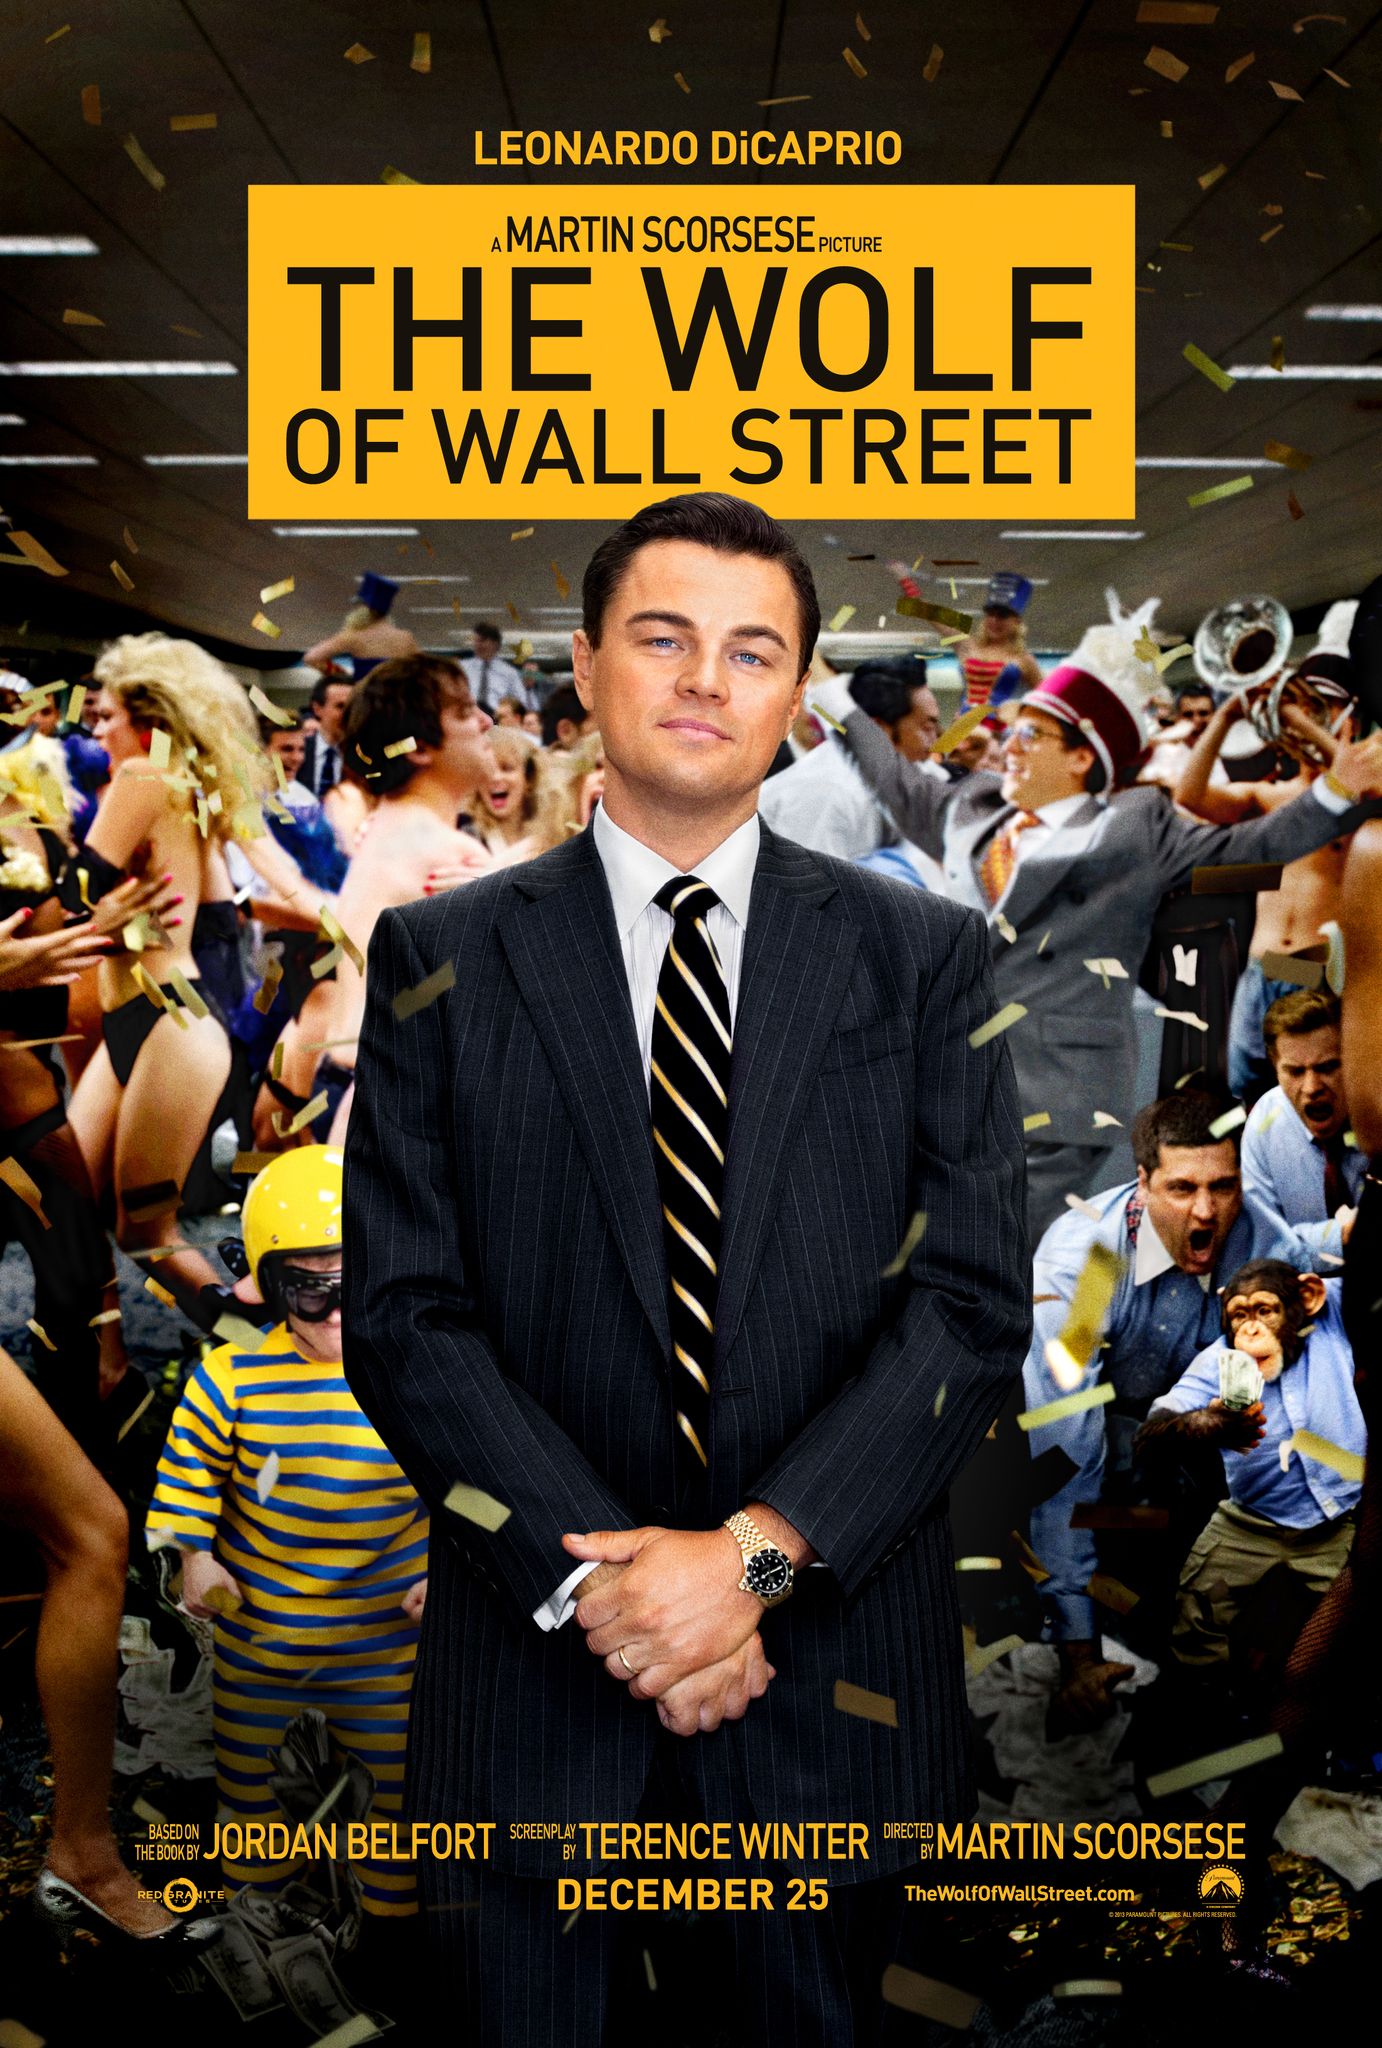 The Wolf of Wall Street (2013) Hindi Dubbed Full Movie